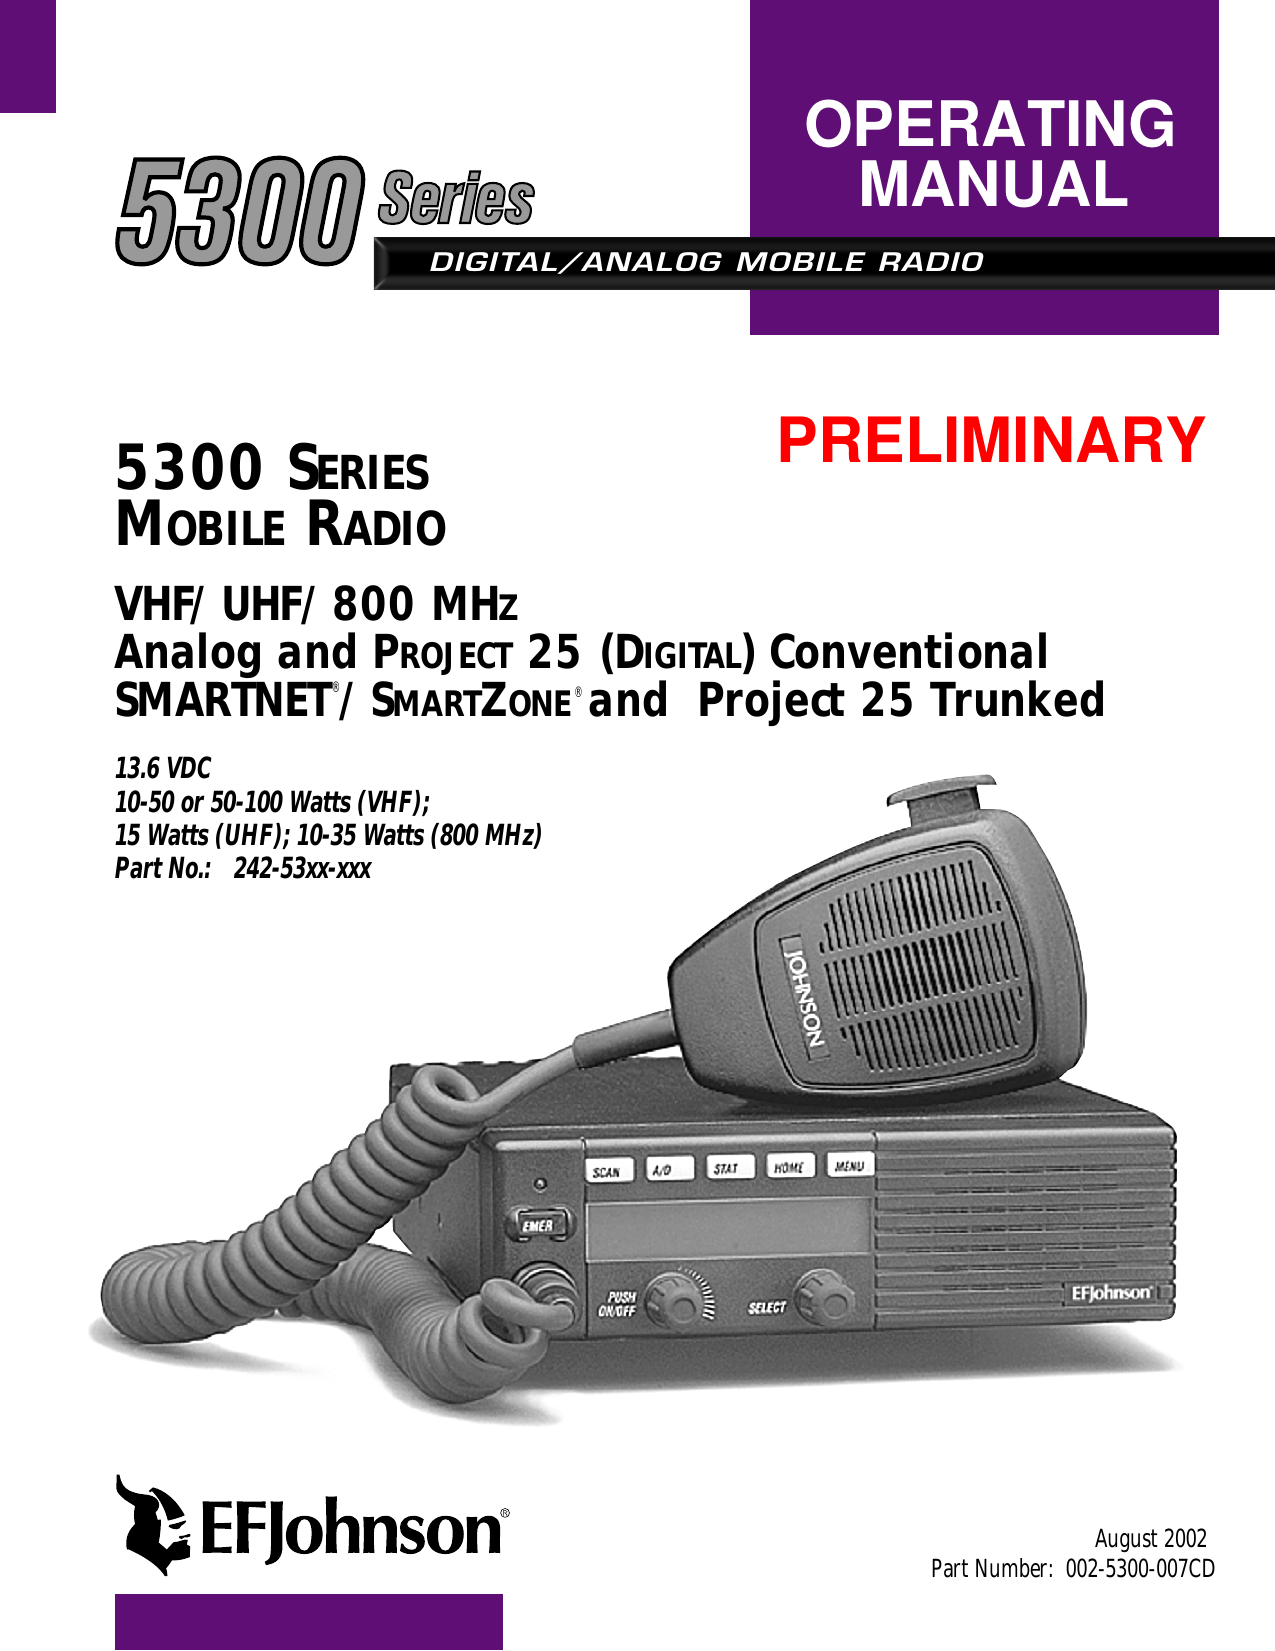 DIGITAL/ANALOG MOBILE RADIOOPERATINGMANUAL5300 SERIESMOBILE RADIOVHF/UHF/800 MHZAnalog and PROJECT 25 (DIGITAL) ConventionalSMARTNET®/SMARTZONE® and  Project 25 Trunked13.6 VDC10-50 or 50-100 Watts (VHF); 15 Watts (UHF); 10-35 Watts (800 MHz)Part No.: 242-53xx-xxxAugust 2002Part Number:  002-5300-007CDPRELIMINARY